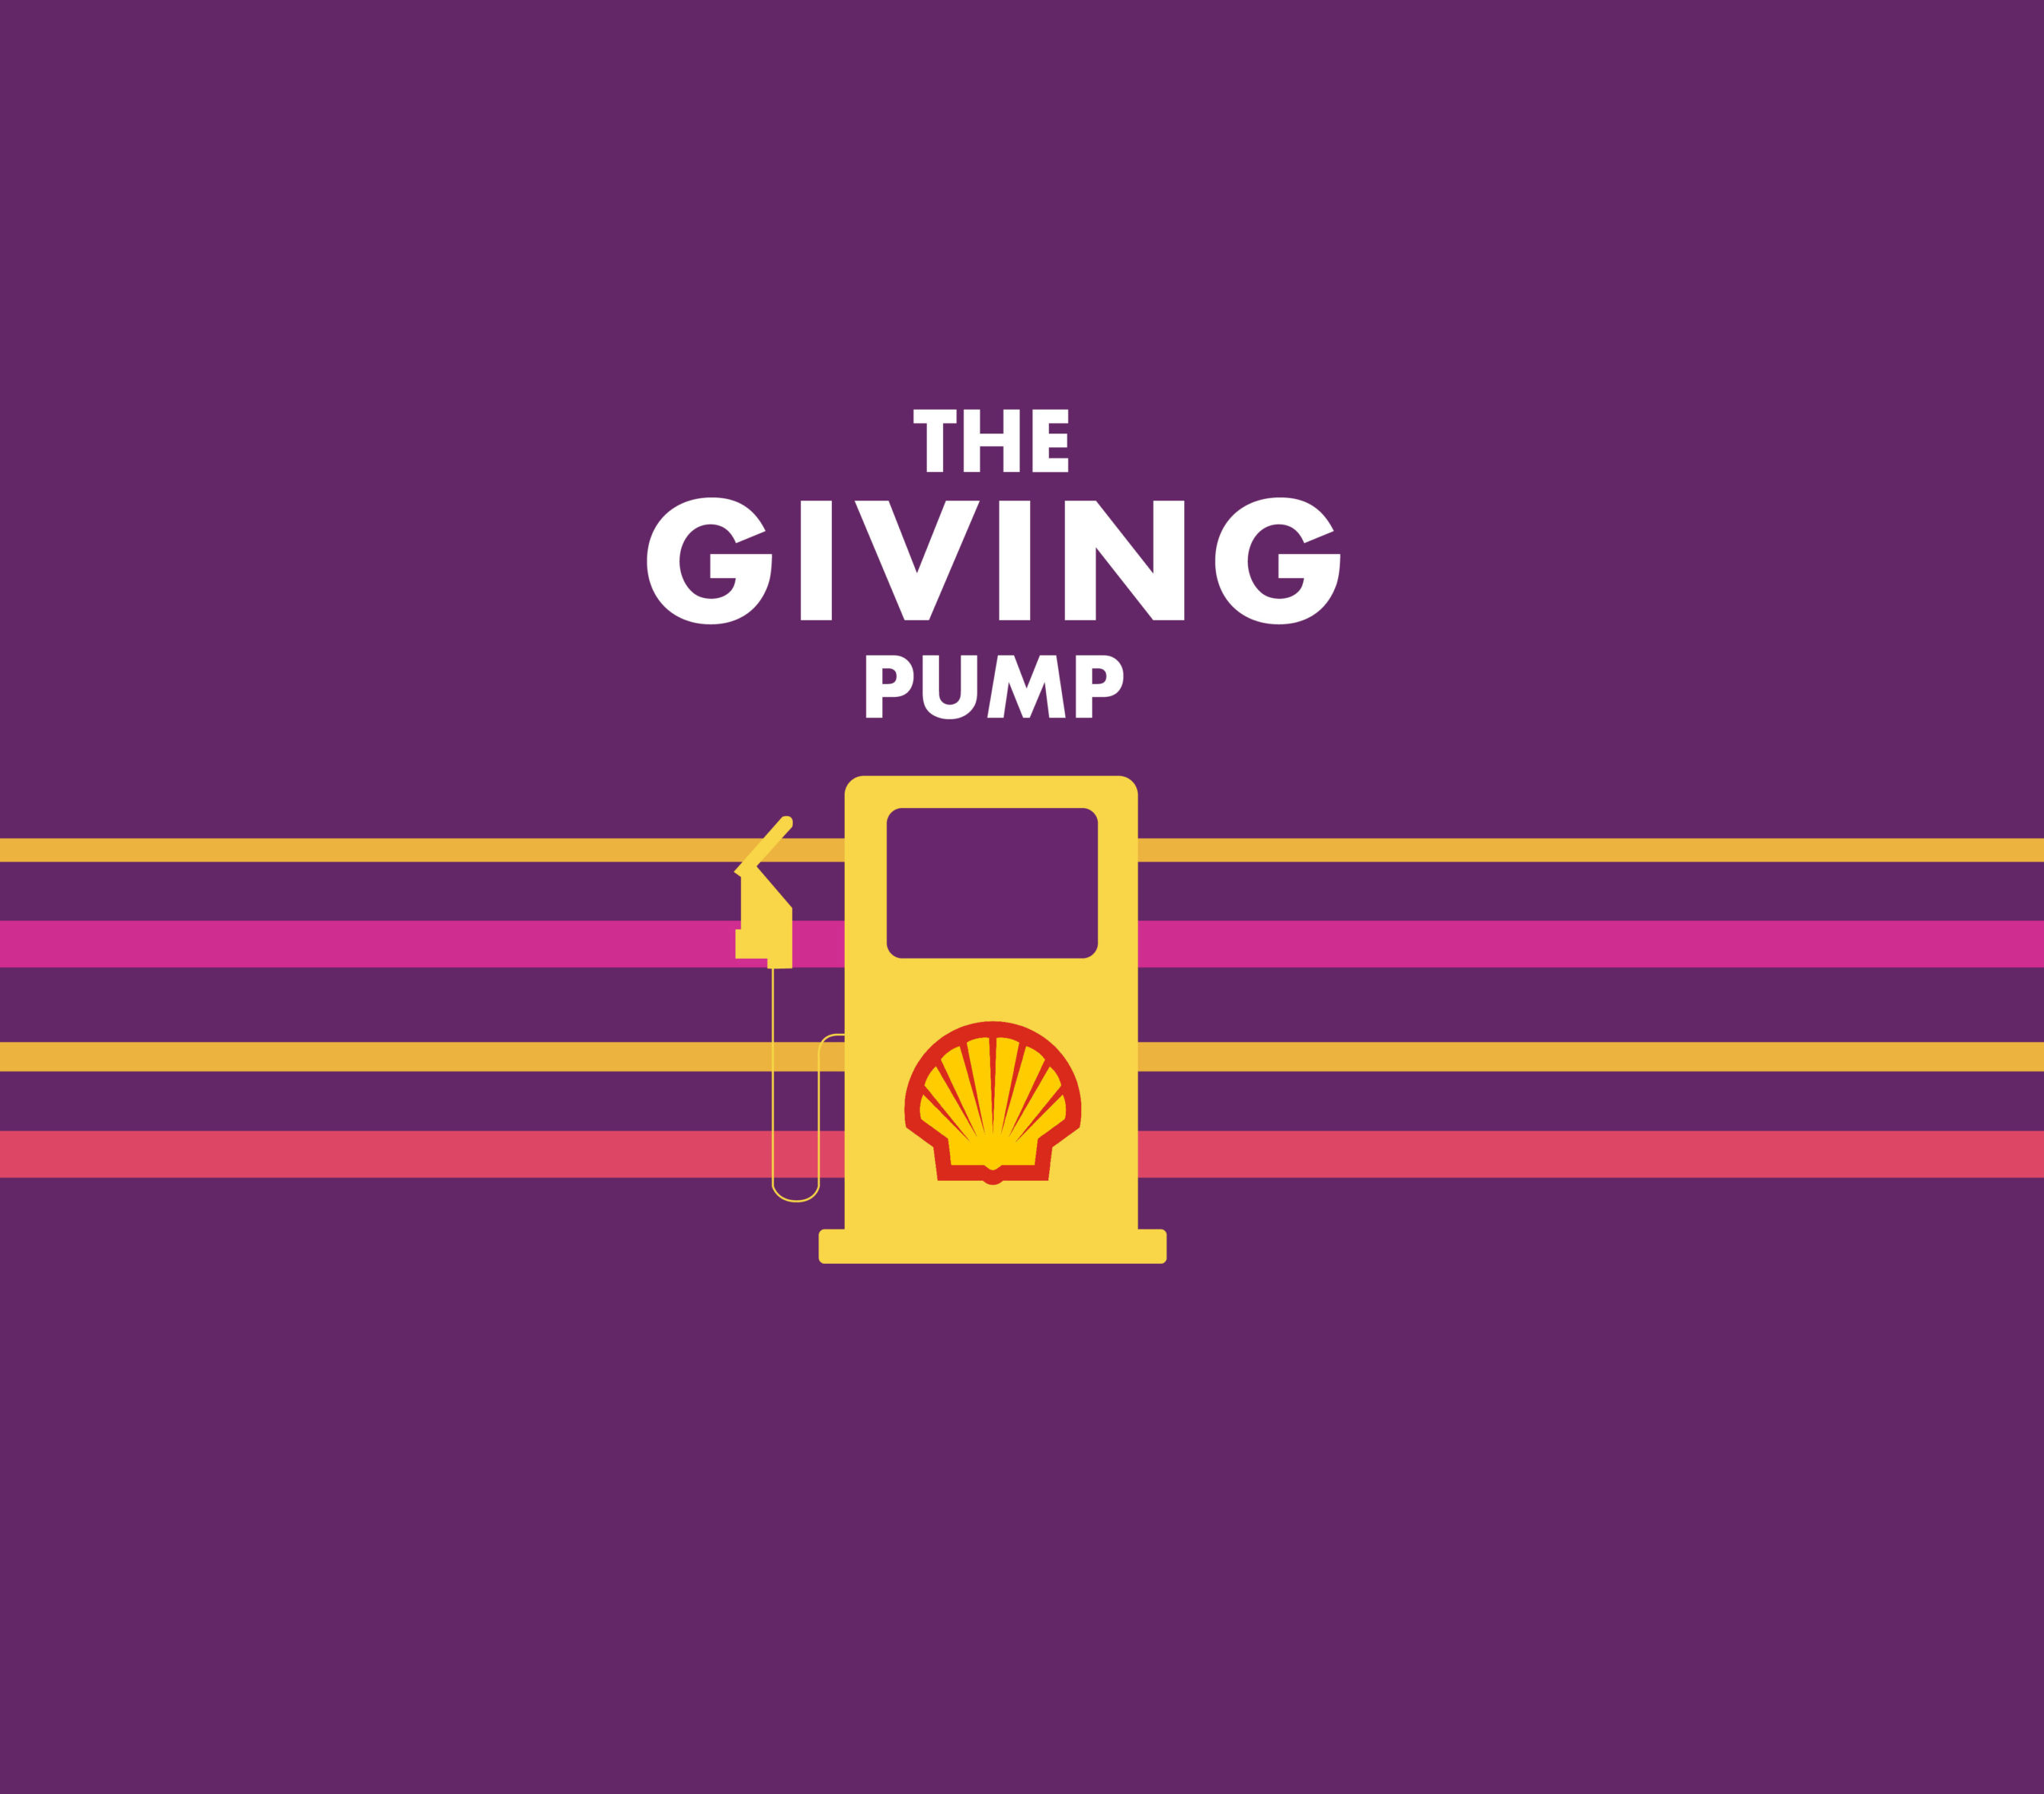 Giving Pump fundraiser for cancer patients in New Mexico